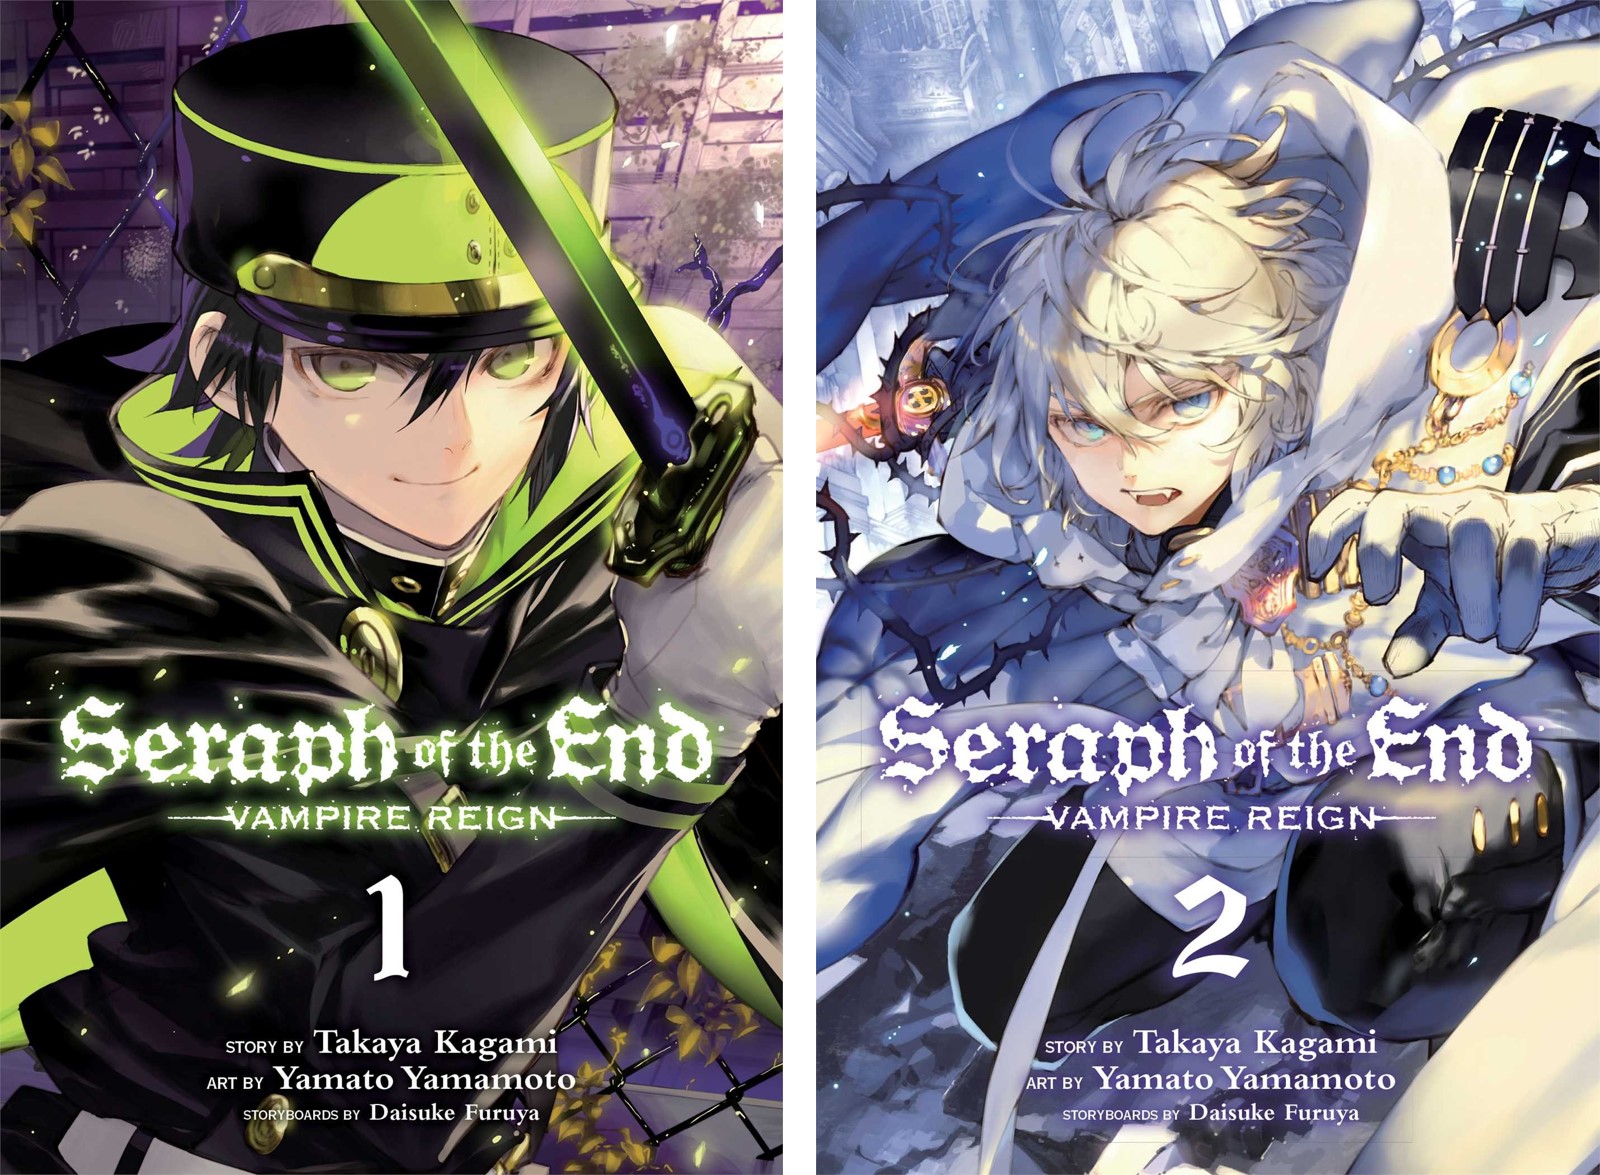 Seraph of the End: Vampire Reign (vols. 1-2) by Takaya Kagami